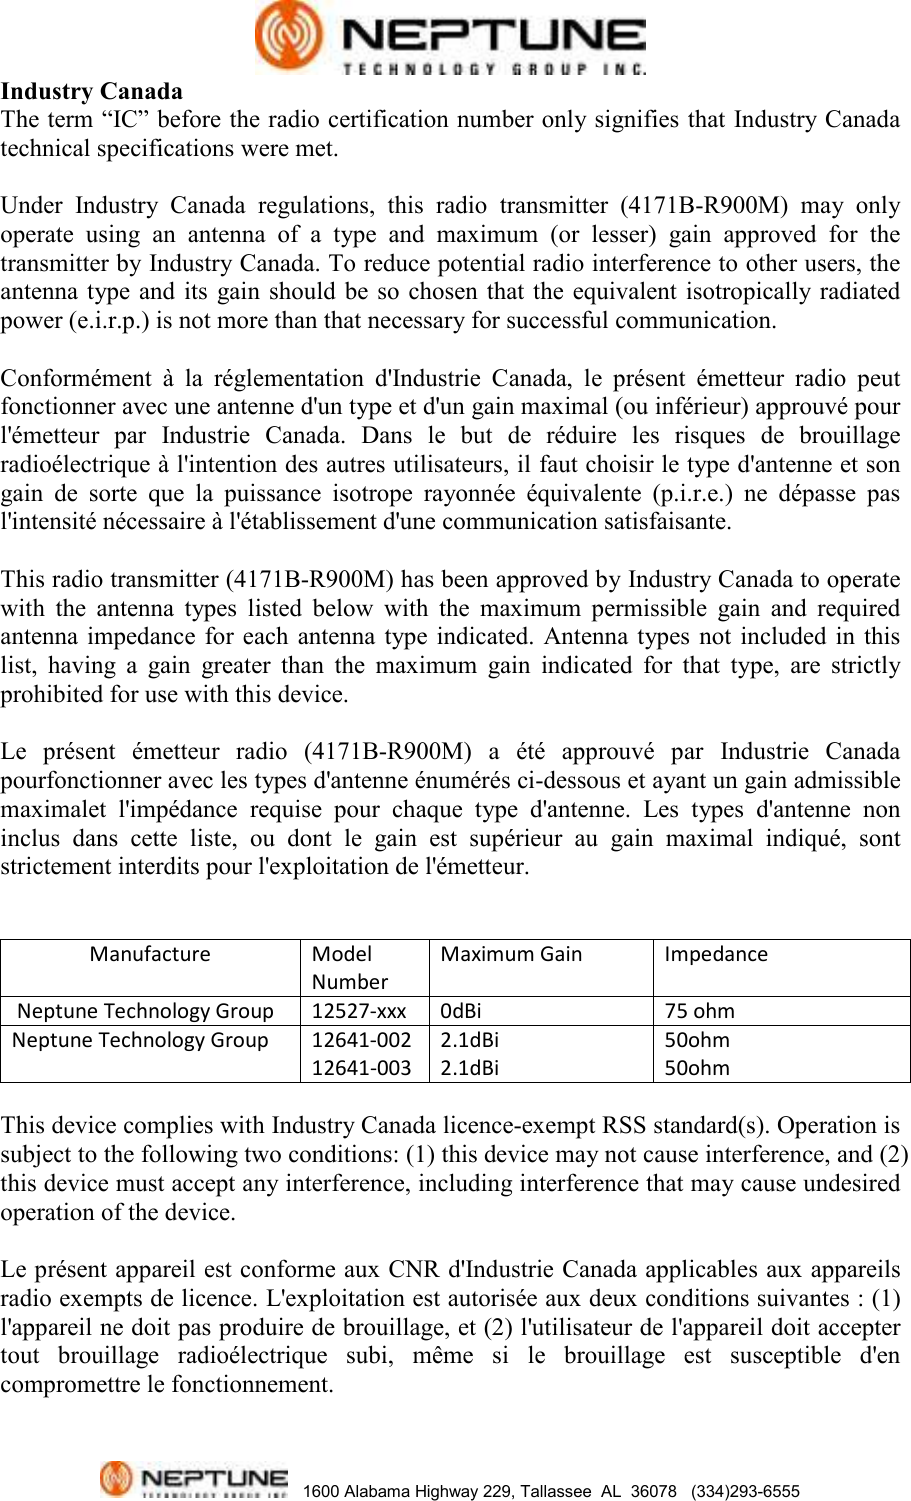   1600 Alabama Highway 229, Tallassee  AL  36078   (334)293-6555 Industry Canada The term “IC” before the radio certification number only signifies that Industry Canada technical specifications were met.  Under  Industry  Canada  regulations,  this  radio  transmitter  (4171B-R900M)  may  only operate  using  an  antenna  of  a  type  and  maximum  (or  lesser)  gain  approved  for  the transmitter by Industry Canada. To reduce potential radio interference to other users, the antenna type and its  gain  should  be so  chosen that  the equivalent  isotropically radiated power (e.i.r.p.) is not more than that necessary for successful communication.  Conformément  à  la  réglementation  d&apos;Industrie  Canada,  le  présent  émetteur  radio  peut fonctionner avec une antenne d&apos;un type et d&apos;un gain maximal (ou inférieur) approuvé pour l&apos;émetteur  par  Industrie  Canada.  Dans  le  but  de  réduire  les  risques  de  brouillage radioélectrique à l&apos;intention des autres utilisateurs, il faut choisir le type d&apos;antenne et son gain  de  sorte  que  la  puissance  isotrope  rayonnée  équivalente  (p.i.r.e.)  ne  dépasse  pas     l&apos;intensité nécessaire à l&apos;établissement d&apos;une communication satisfaisante.  This radio transmitter (4171B-R900M) has been approved by Industry Canada to operate with  the  antenna  types  listed  below  with  the  maximum  permissible  gain  and  required antenna impedance  for each  antenna  type  indicated.  Antenna types  not  included in  this list,  having  a  gain  greater  than  the  maximum  gain  indicated  for  that  type,  are  strictly prohibited for use with this device.   Le  présent  émetteur  radio  (4171B-R900M)  a  été  approuvé  par  Industrie  Canada pourfonctionner avec les types d&apos;antenne énumérés ci-dessous et ayant un gain admissible maximalet  l&apos;impédance  requise  pour  chaque  type  d&apos;antenne.  Les  types  d&apos;antenne  non inclus  dans  cette  liste,  ou  dont  le  gain  est  supérieur  au  gain  maximal  indiqué,  sont strictement interdits pour l&apos;exploitation de l&apos;émetteur.                  Manufacture Model Number Maximum Gain Impedance  Neptune Technology Group 12527-xxx 0dBi 75 ohm Neptune Technology Group 12641-002 12641-003 2.1dBi 2.1dBi 50ohm 50ohm  This device complies with Industry Canada licence-exempt RSS standard(s). Operation is subject to the following two conditions: (1) this device may not cause interference, and (2) this device must accept any interference, including interference that may cause undesired operation of the device.  Le présent appareil est conforme aux CNR d&apos;Industrie Canada applicables aux appareils radio exempts de licence. L&apos;exploitation est autorisée aux deux conditions suivantes : (1) l&apos;appareil ne doit pas produire de brouillage, et (2) l&apos;utilisateur de l&apos;appareil doit accepter tout  brouillage  radioélectrique  subi,  même  si  le  brouillage  est  susceptible  d&apos;en compromettre le fonctionnement. 